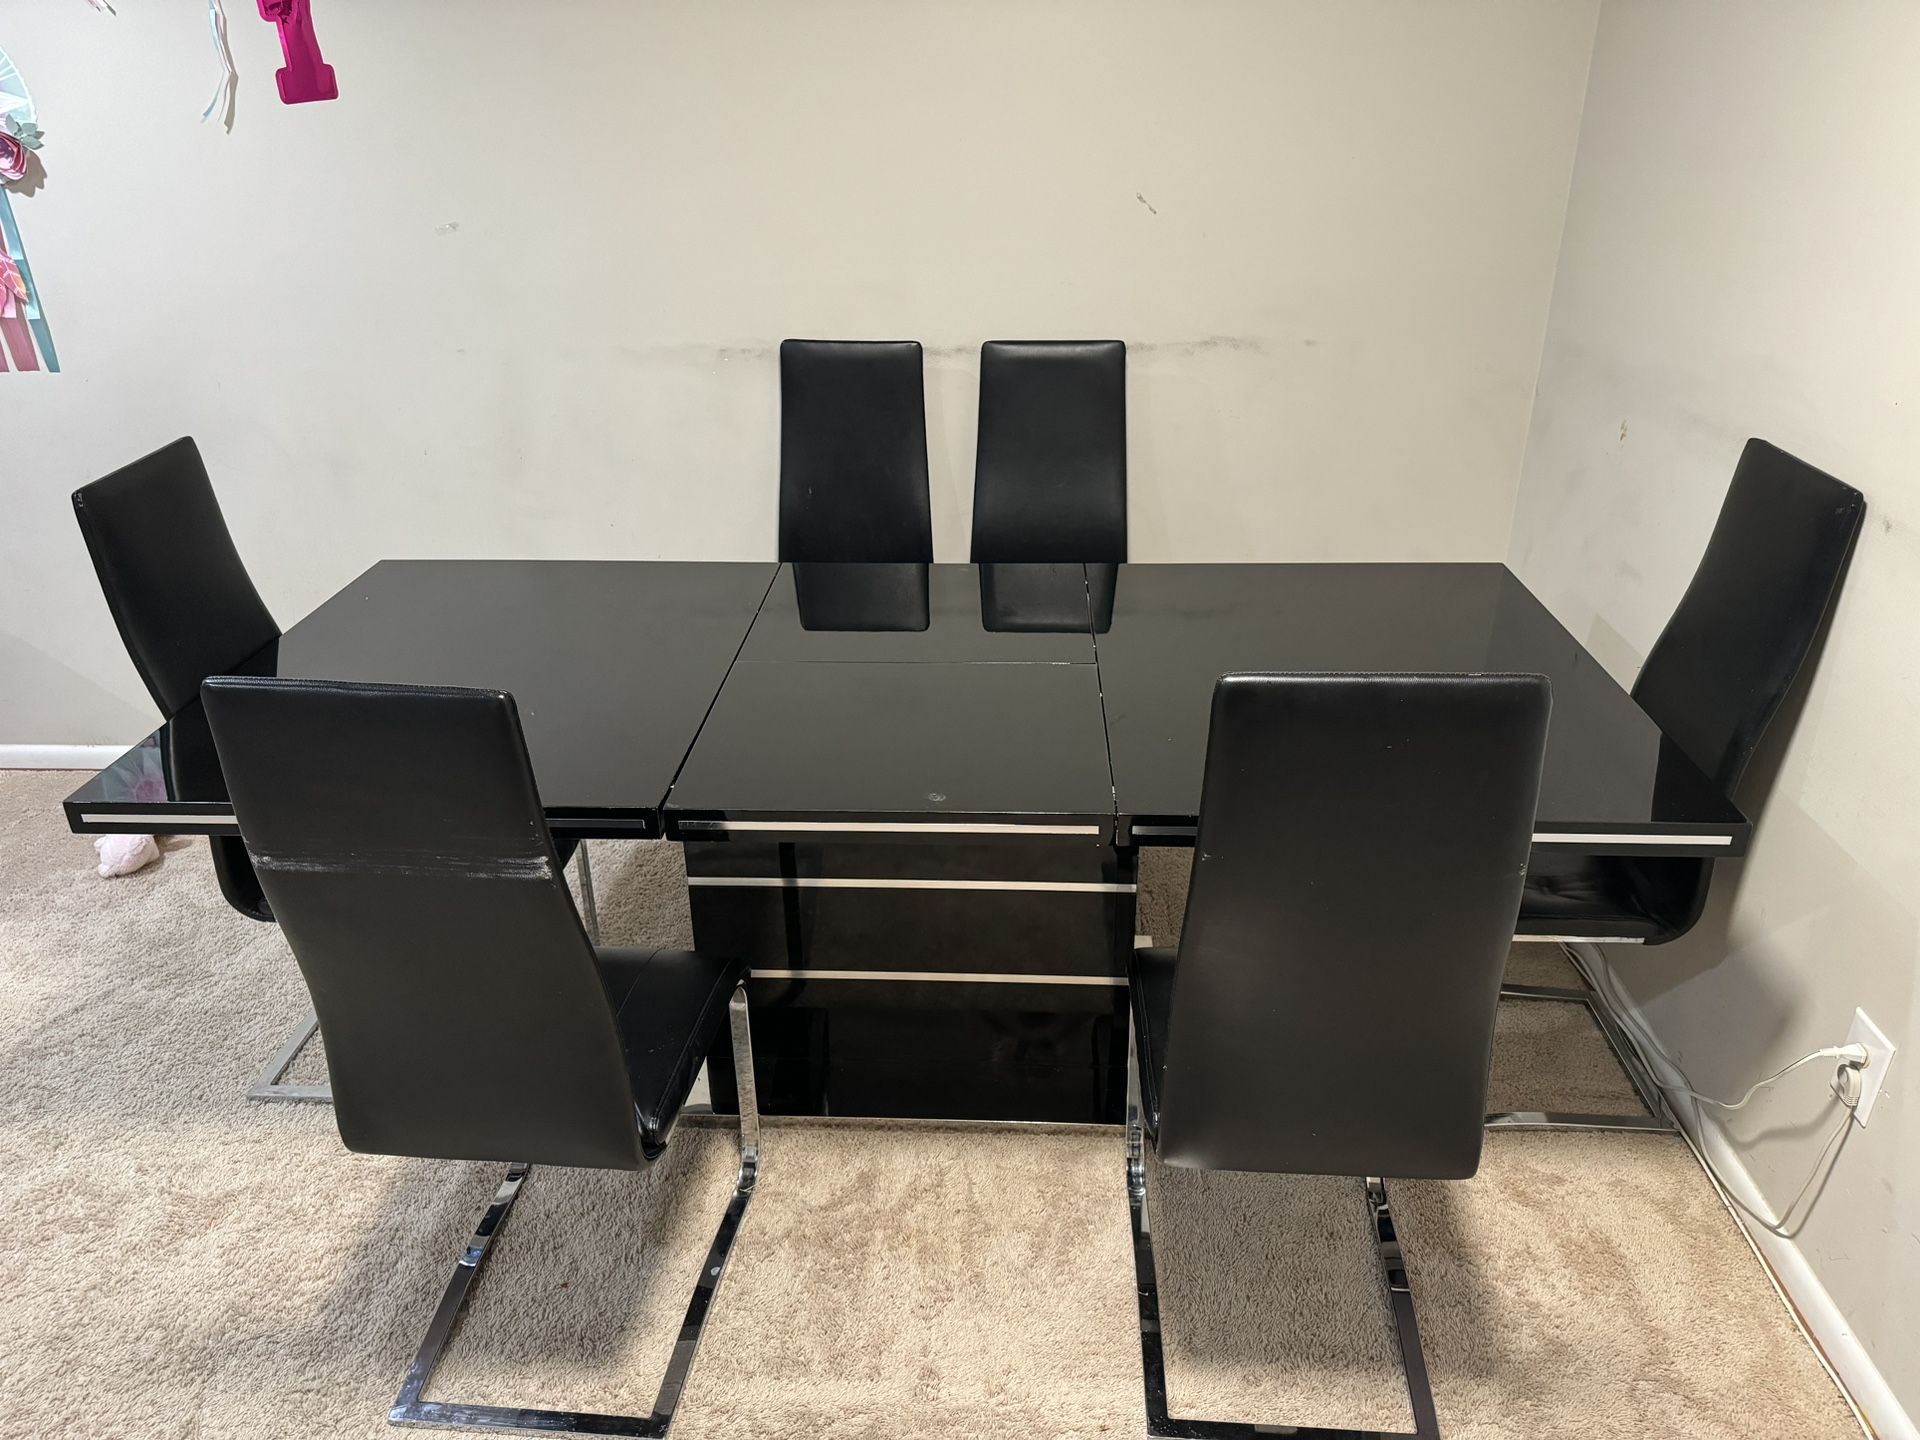 Rectangular dining table set for 2, 4, 6 people/guest with chairs - negotiable price- $350